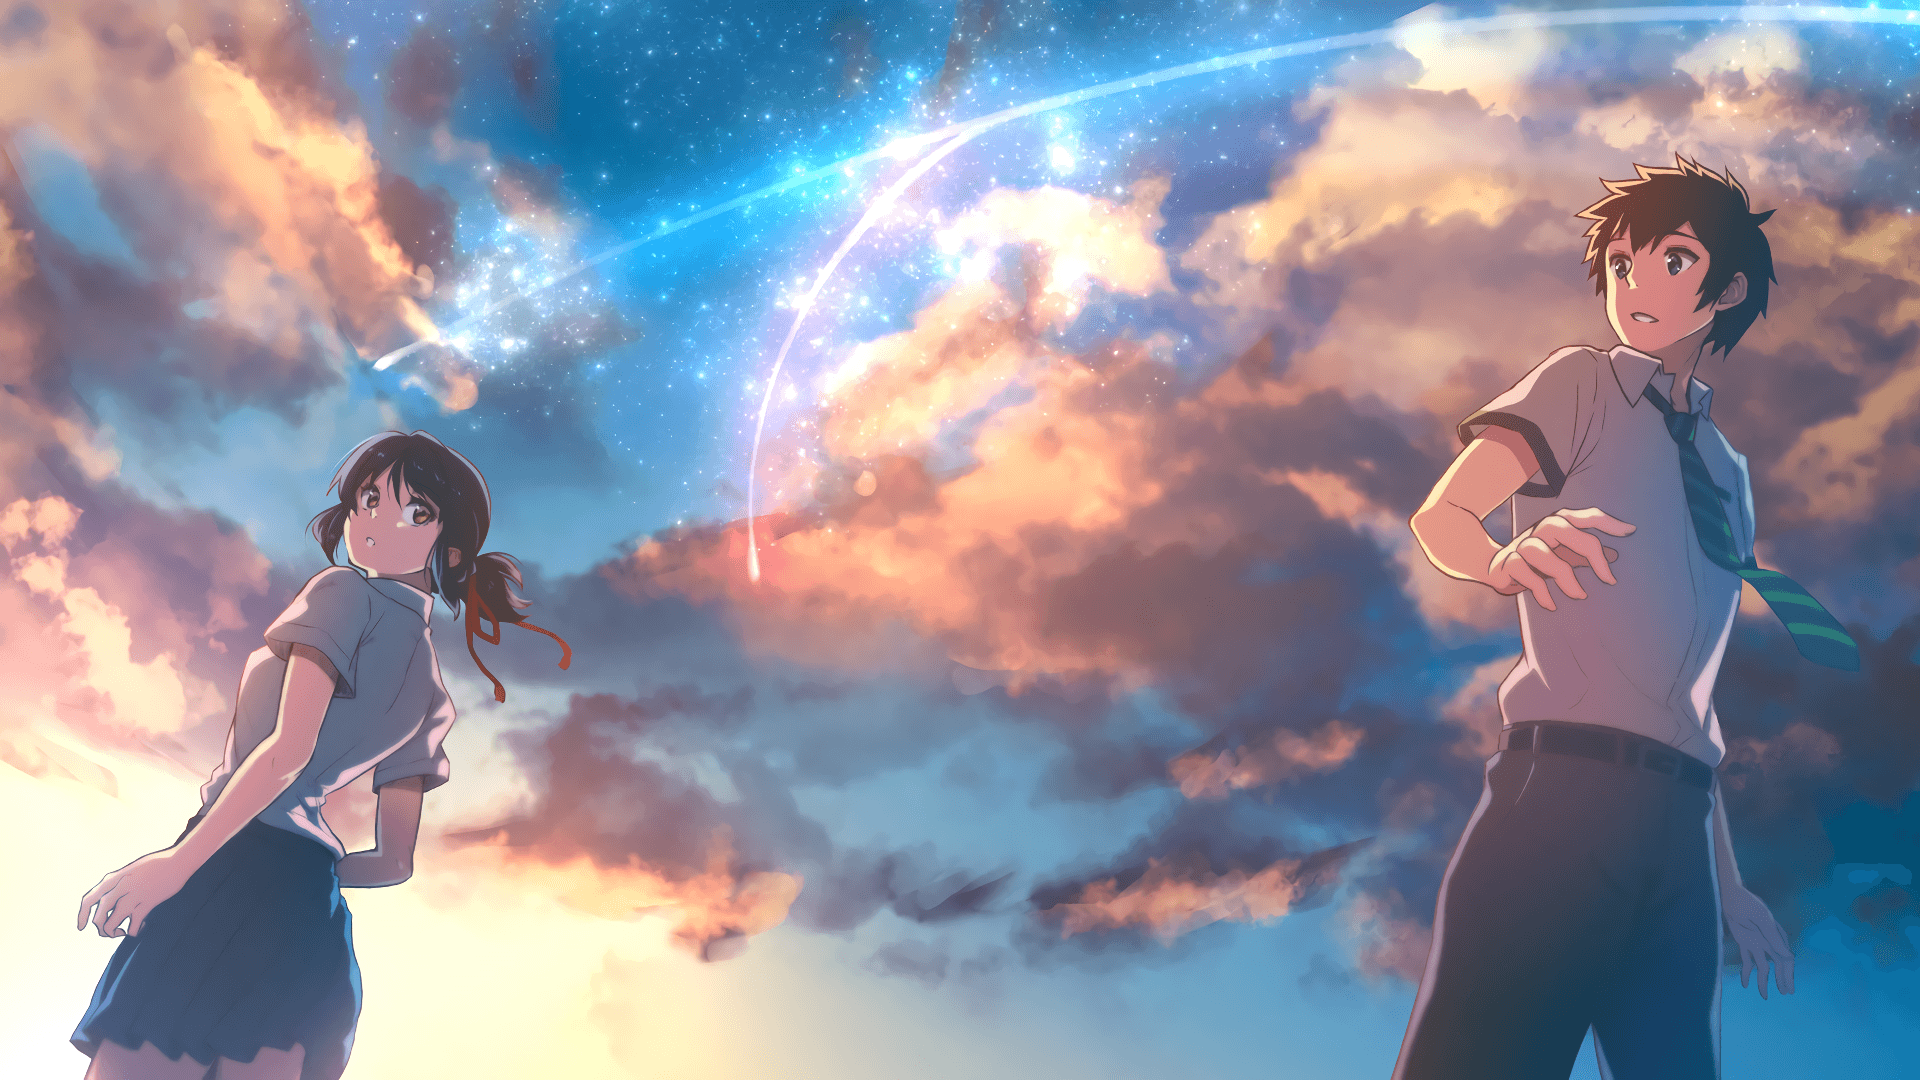 HD 4k Anime Your Name Wallpapers - Wallpaper Cave